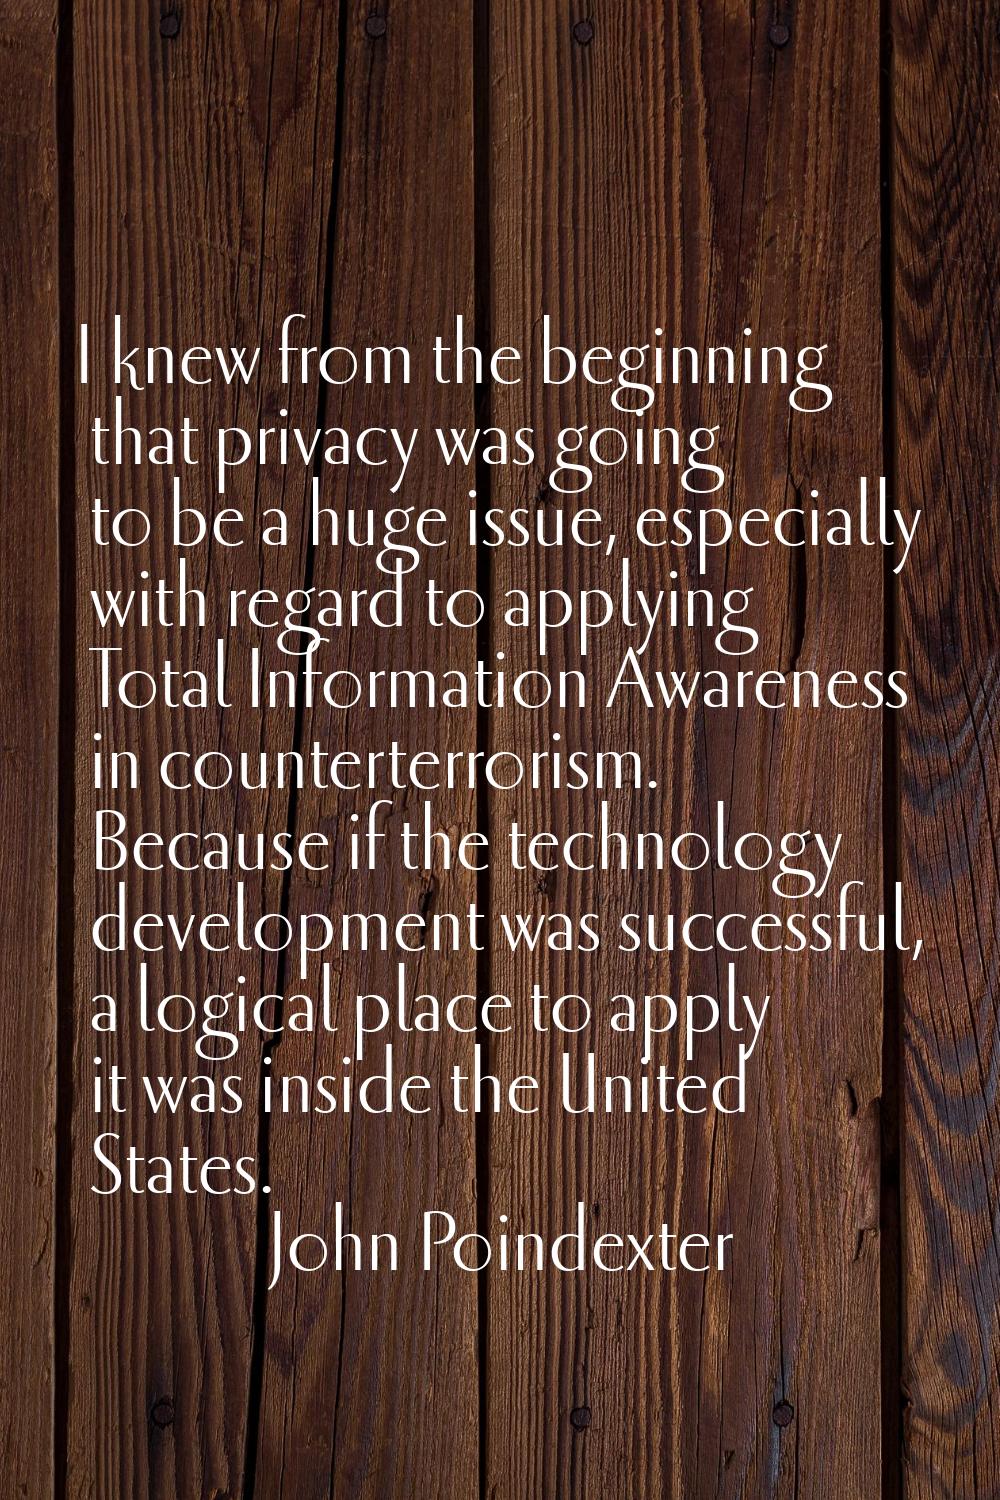 I knew from the beginning that privacy was going to be a huge issue, especially with regard to appl